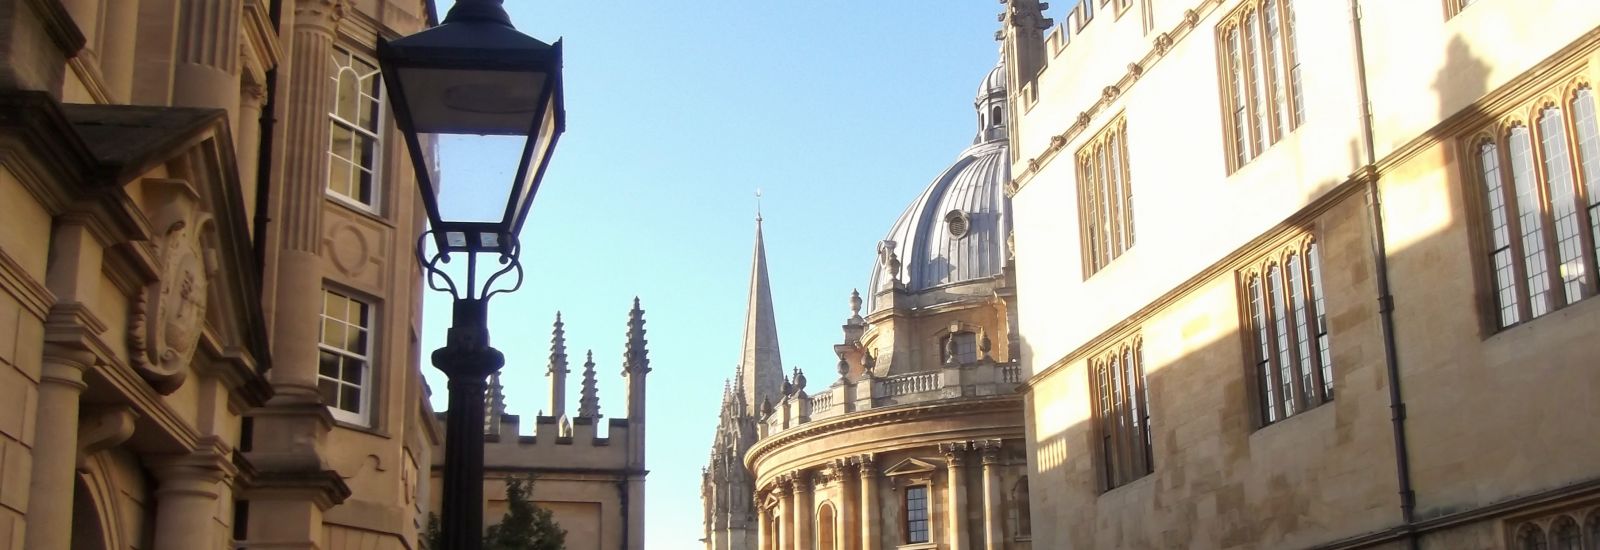 Sun outside the Bodleian Library